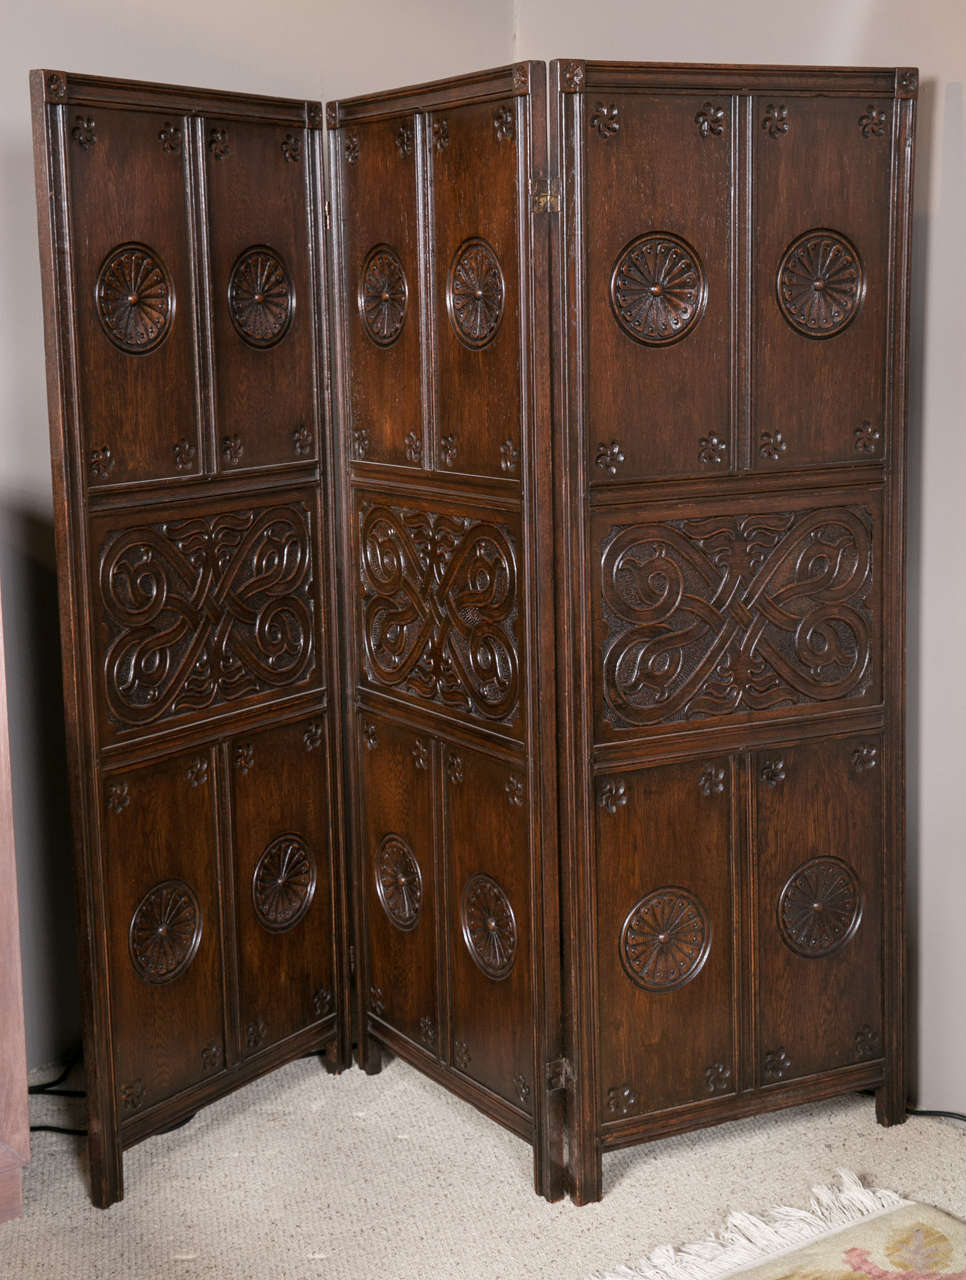 An English 19th century carved oak screen. Provenance- from Mary Rockefeller's Estate in Westchester NY.